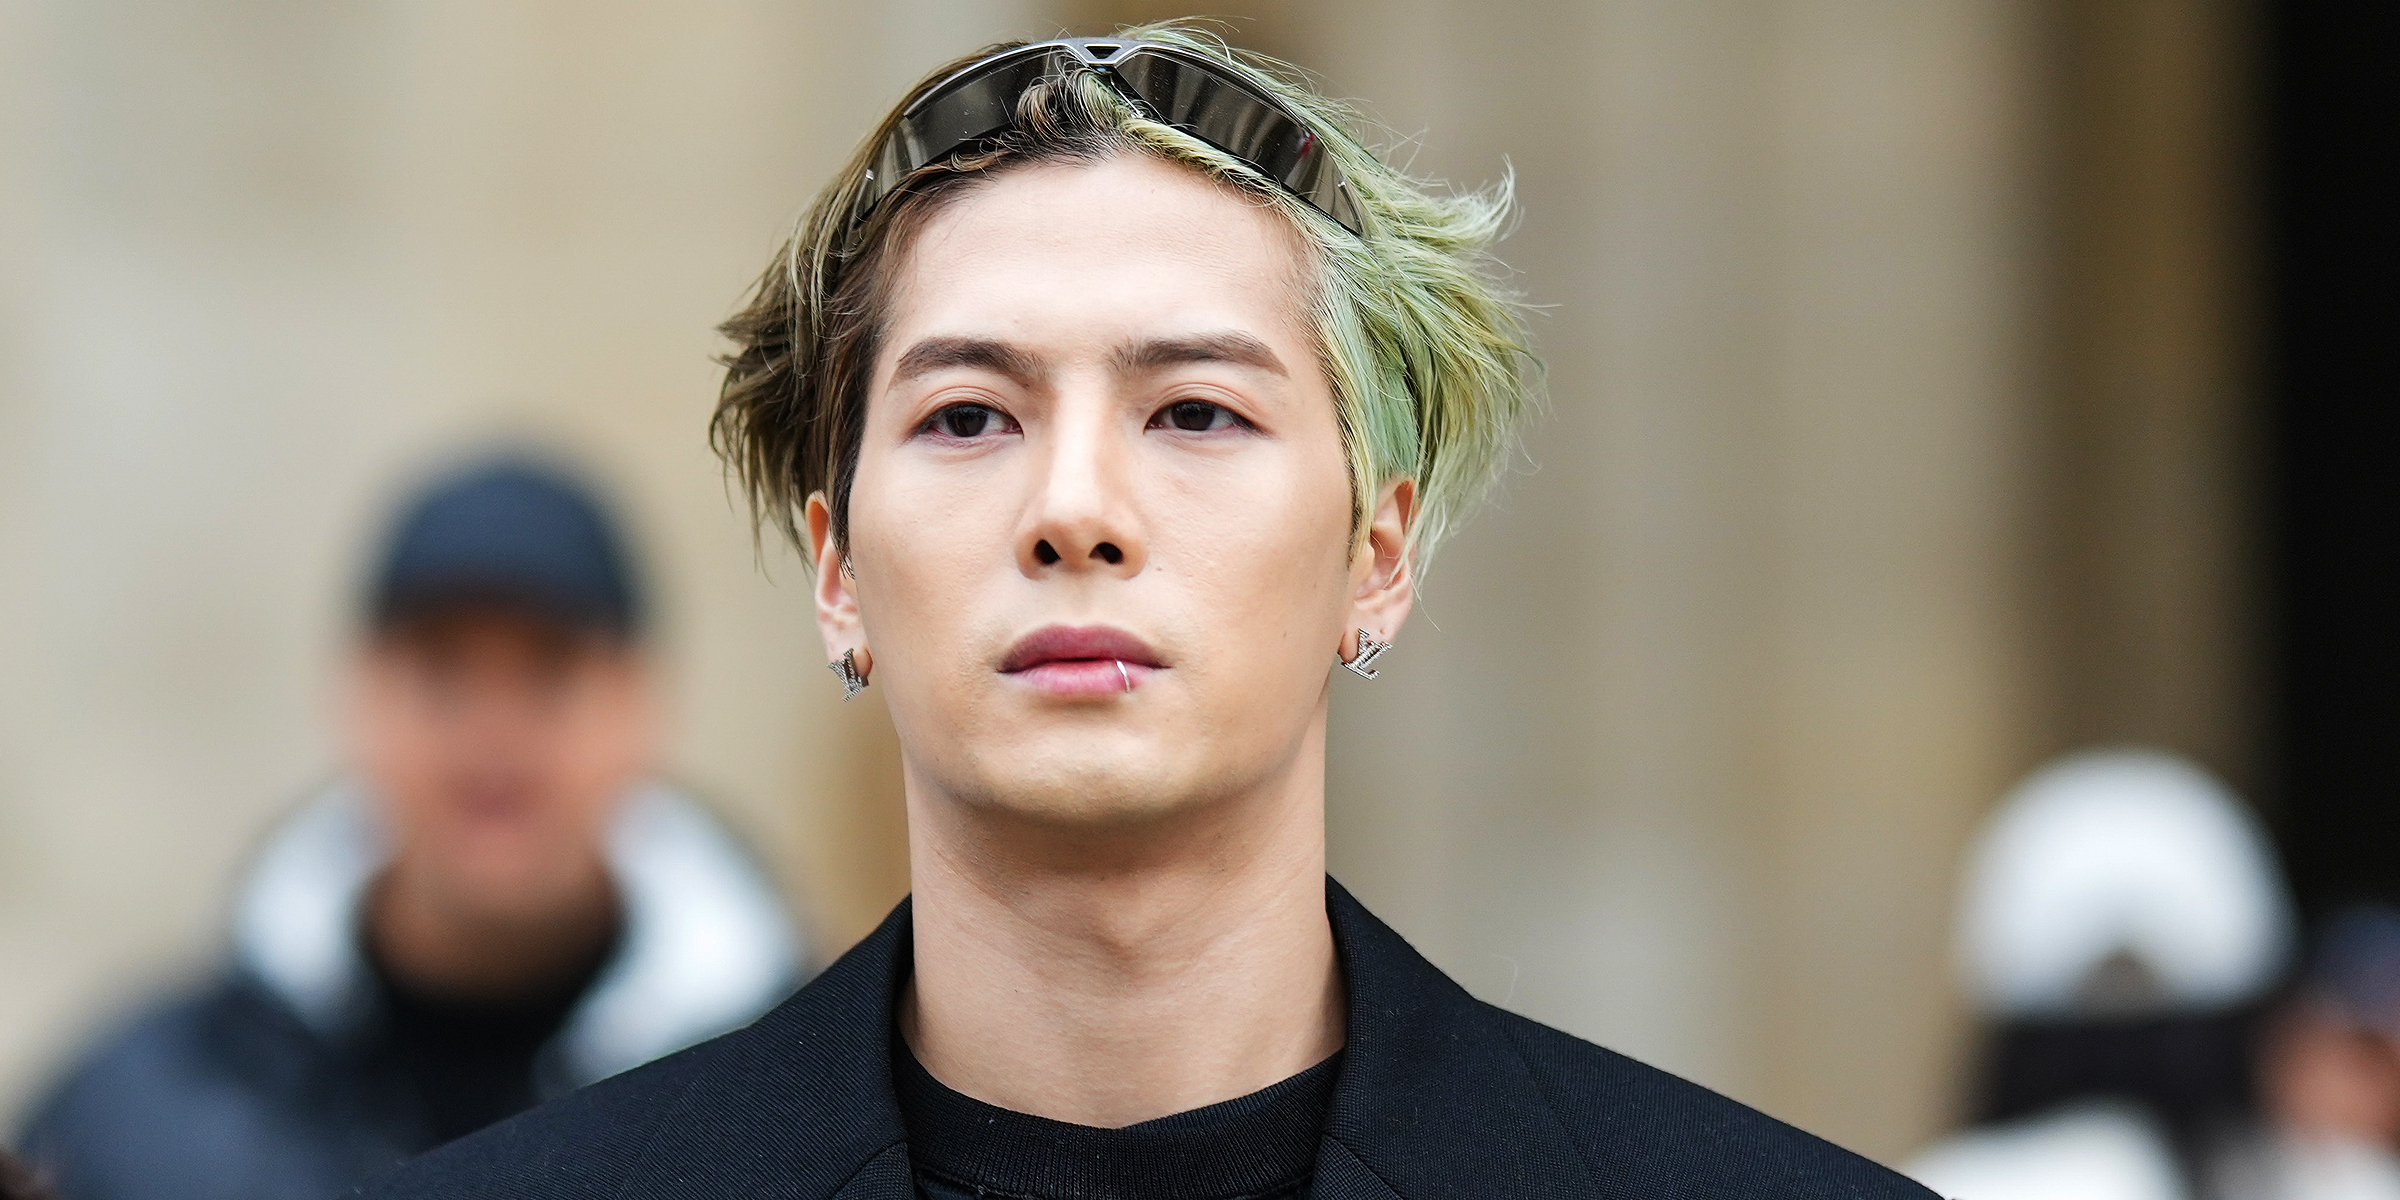 Jackson Wang | Source: Getty Images